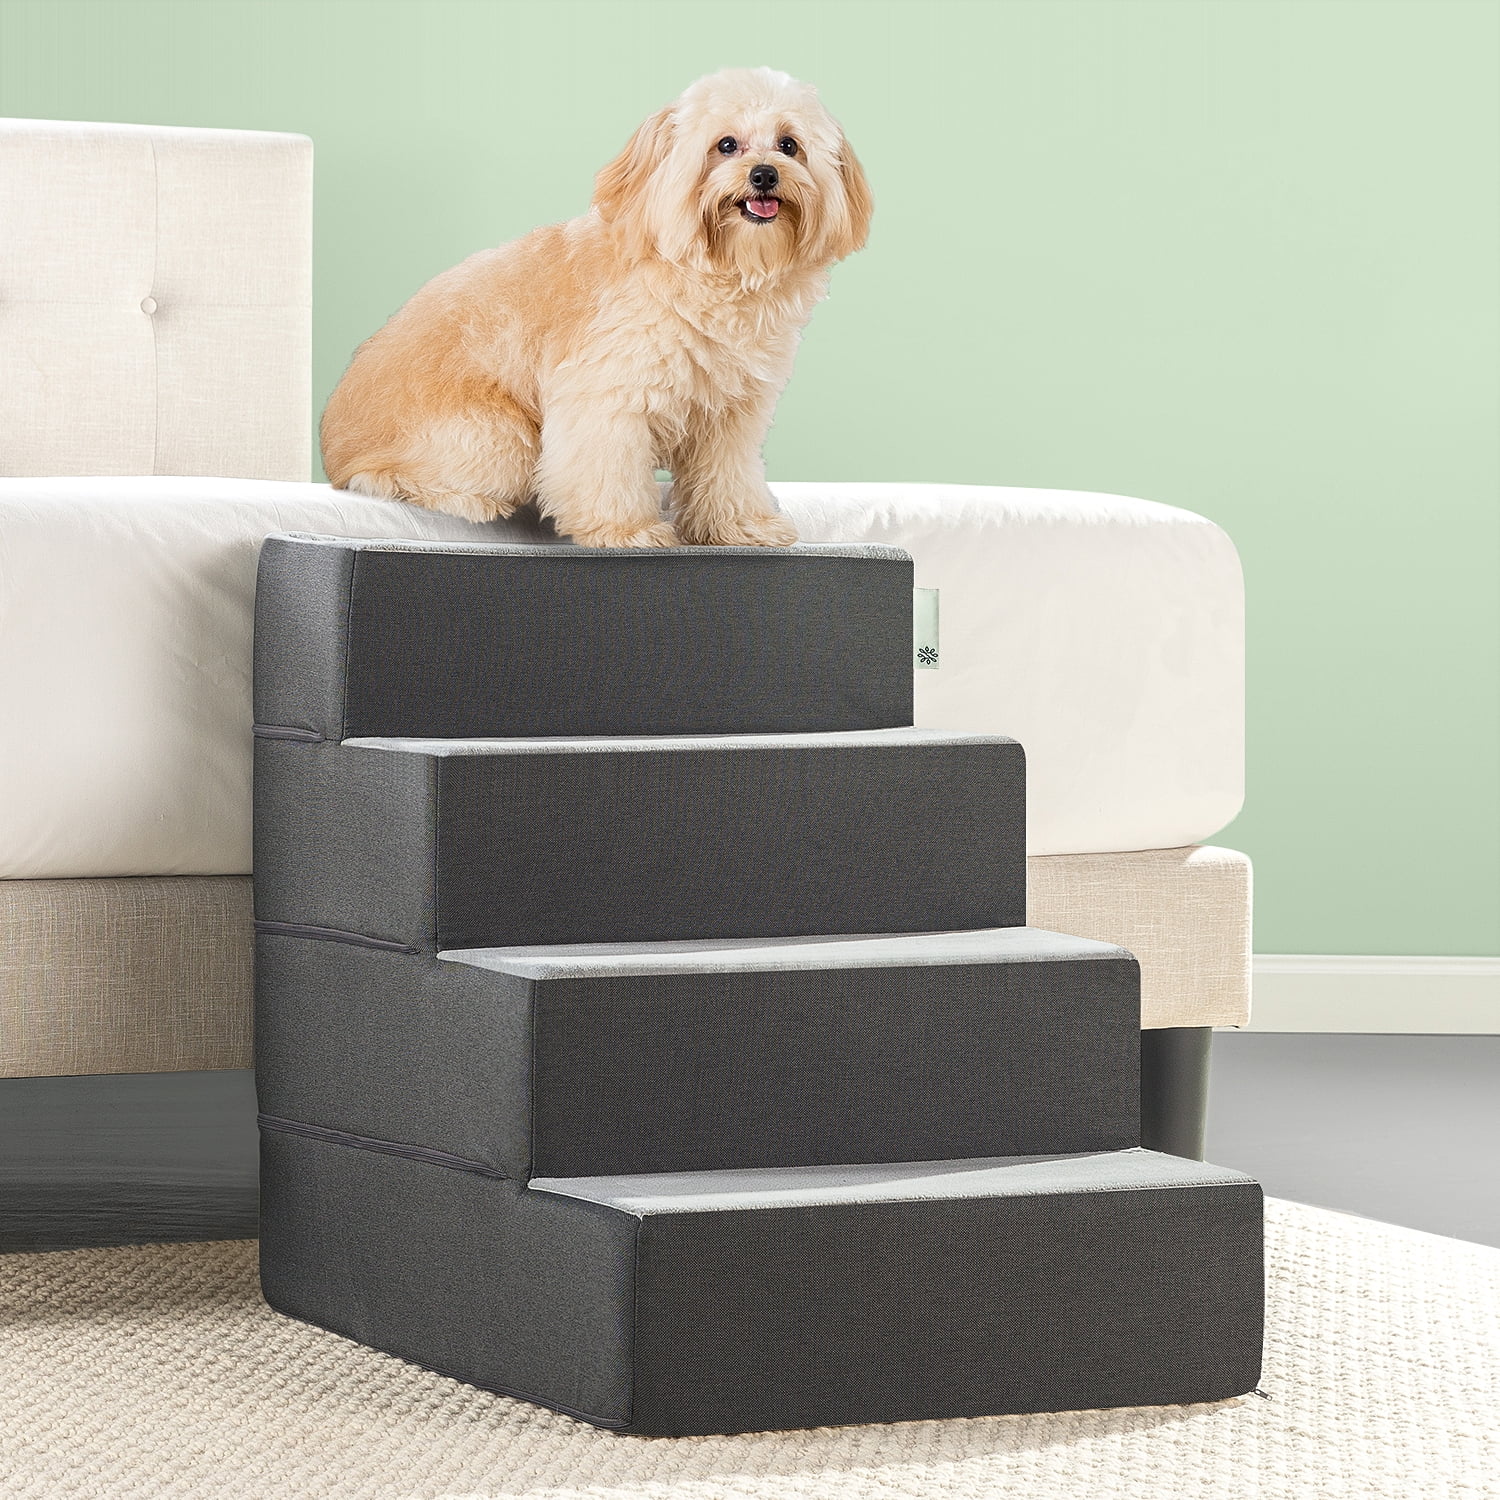 steps for little dogs